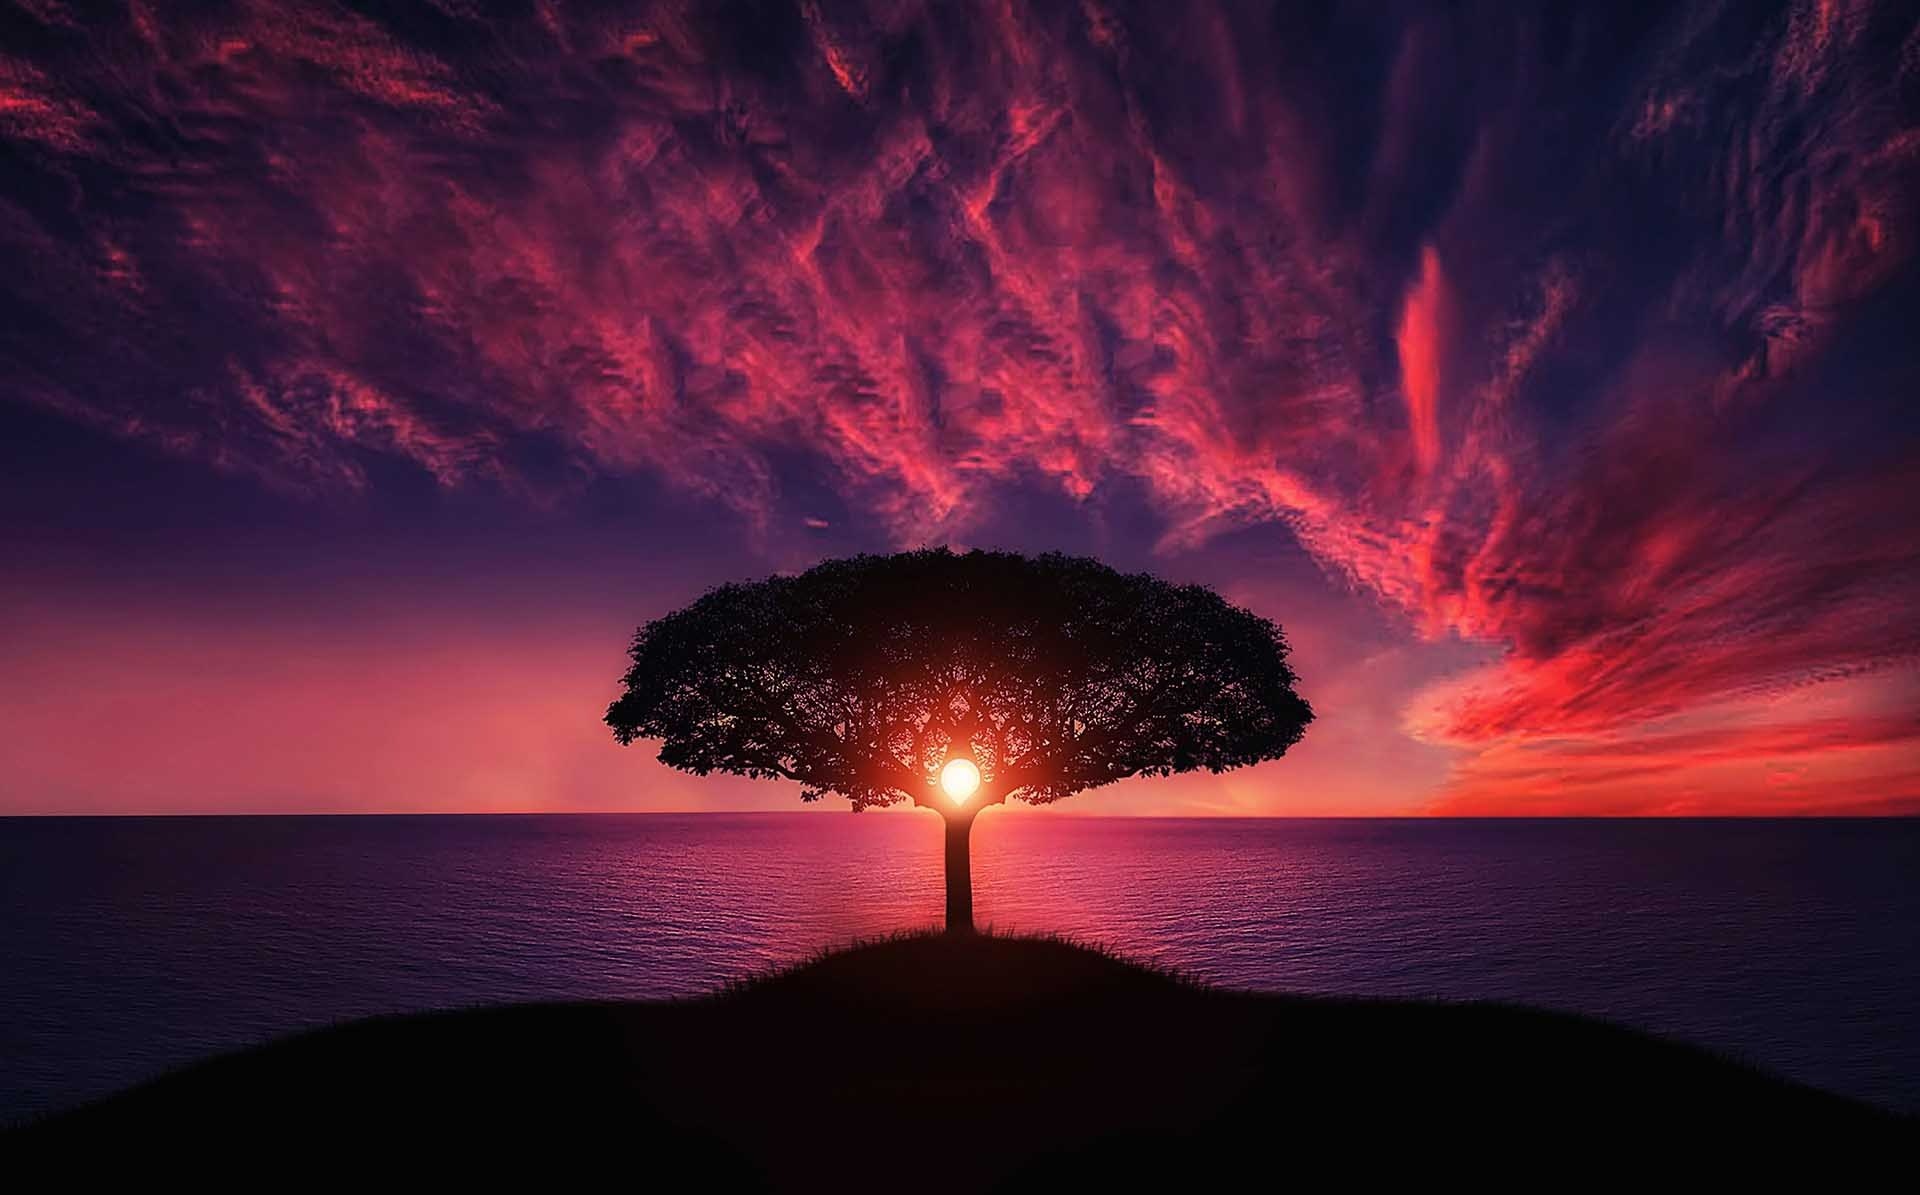 image of a sunset with a tree in the foreground, making it appear black